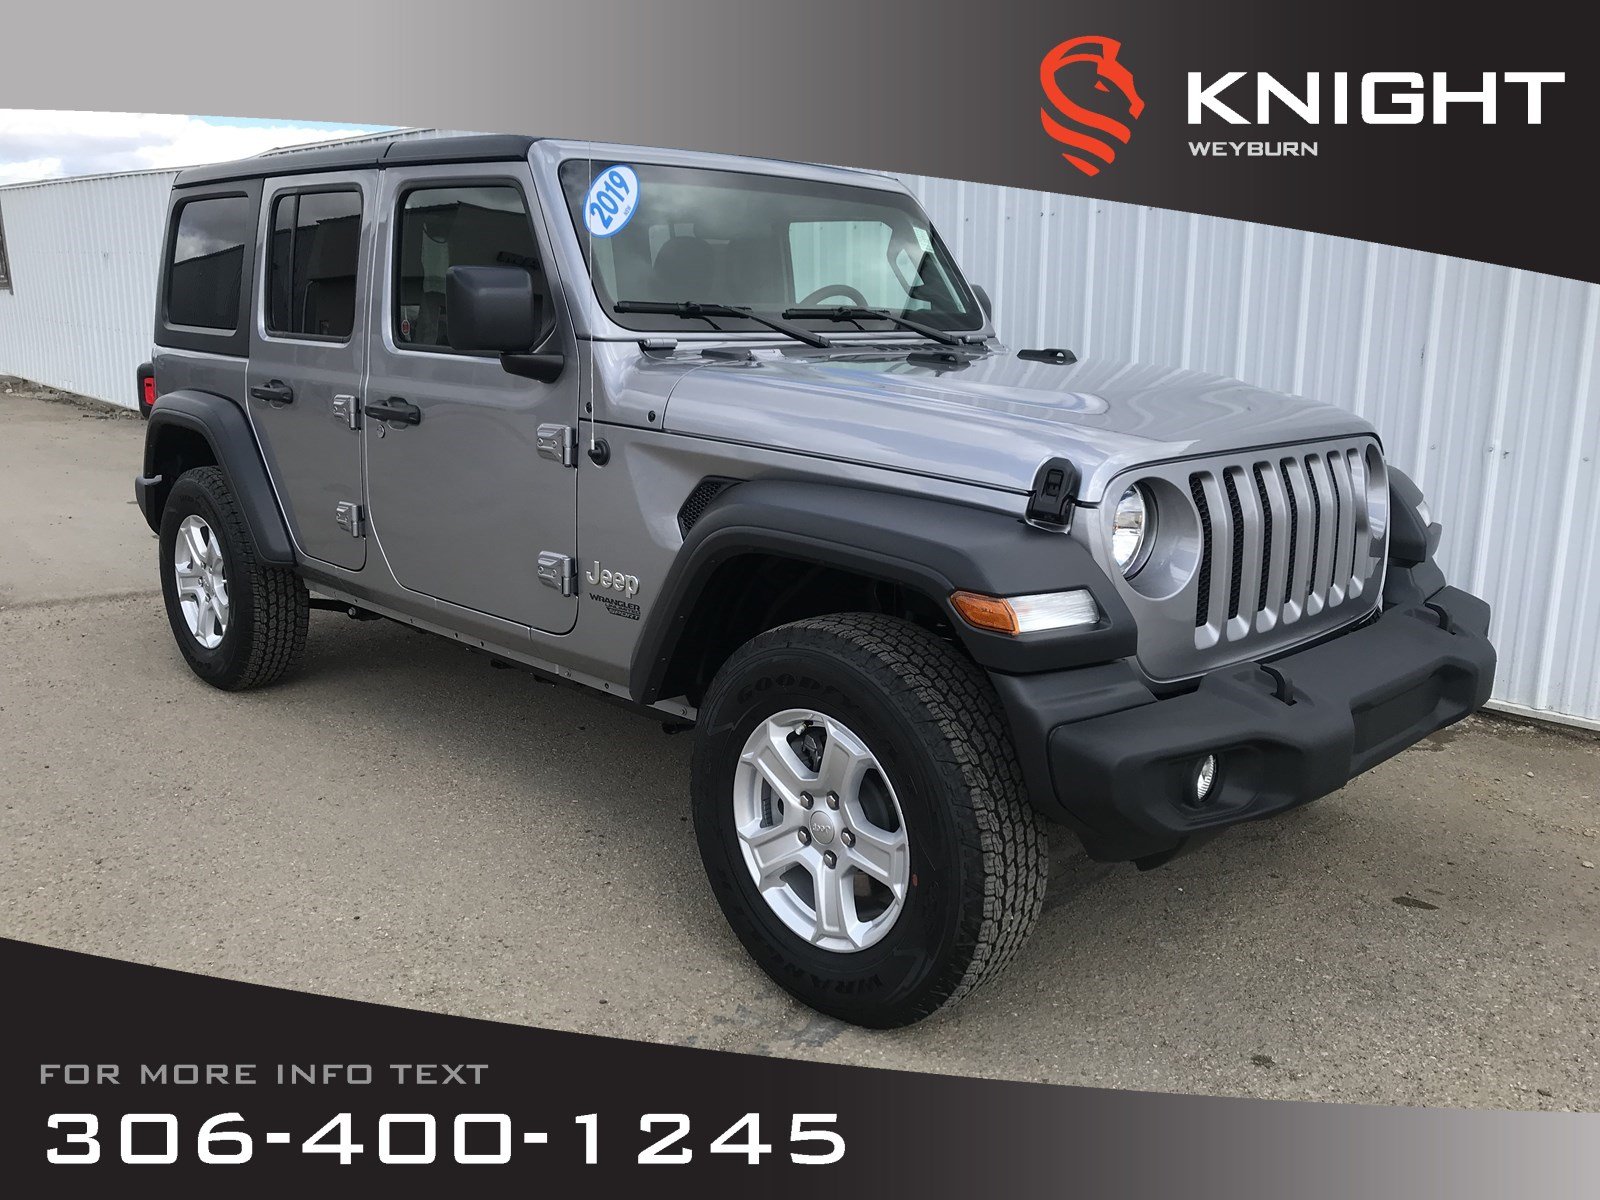 New 2019 Jeep Wrangler Unlimited Sport S 4x4 Turbo Heated Seats Black Freedom Hardtop Remote Start Back Up Camera Bluetooth 4wd